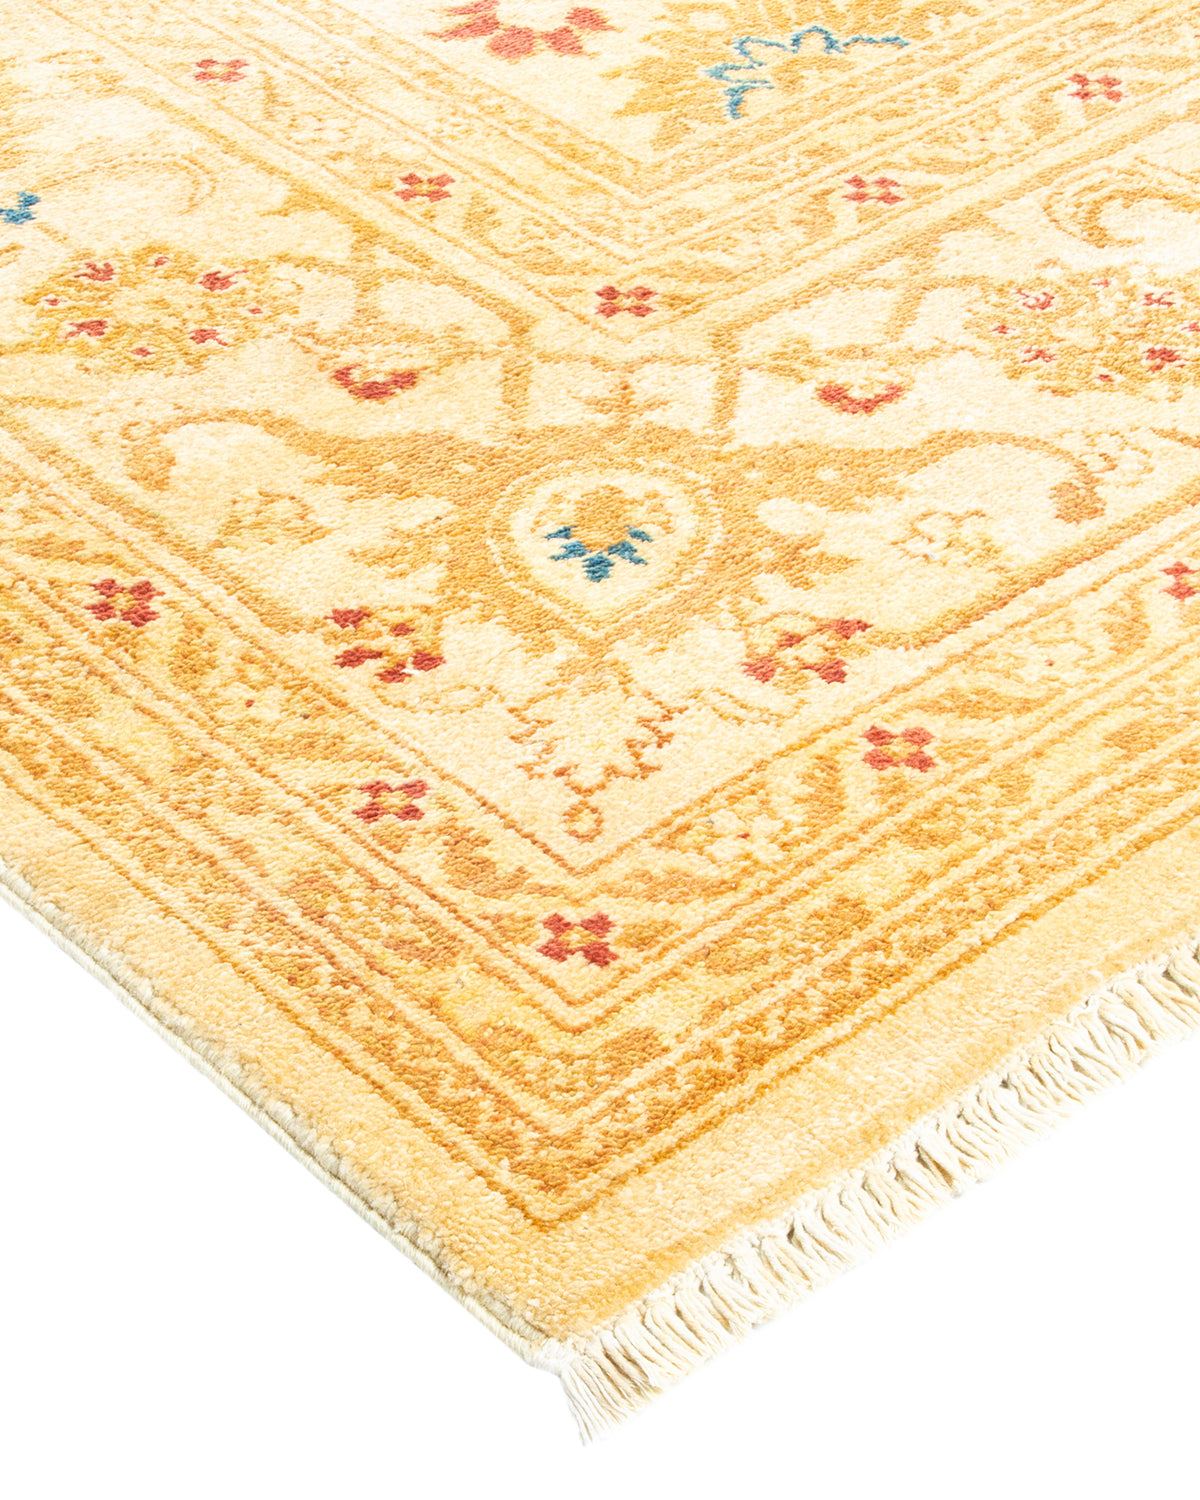 Eclectic, One-of-a-Kind Hand-Knotted Area Rug  - Ivory,  8' 1" x 10' 8"